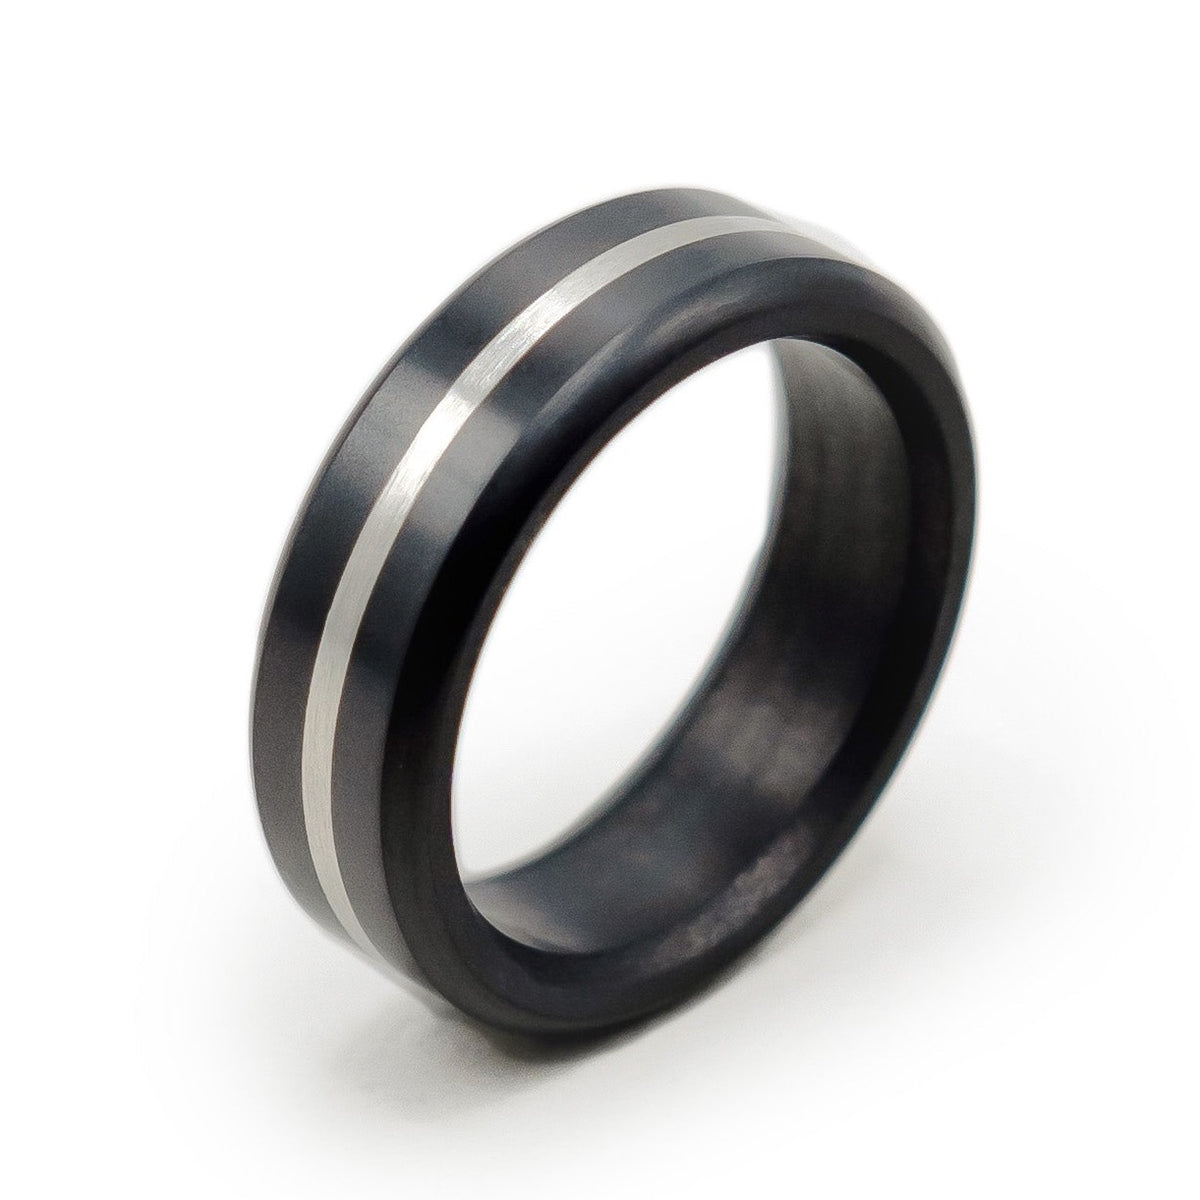 Kratos Rounded Platinum Inlay Ring 7mm